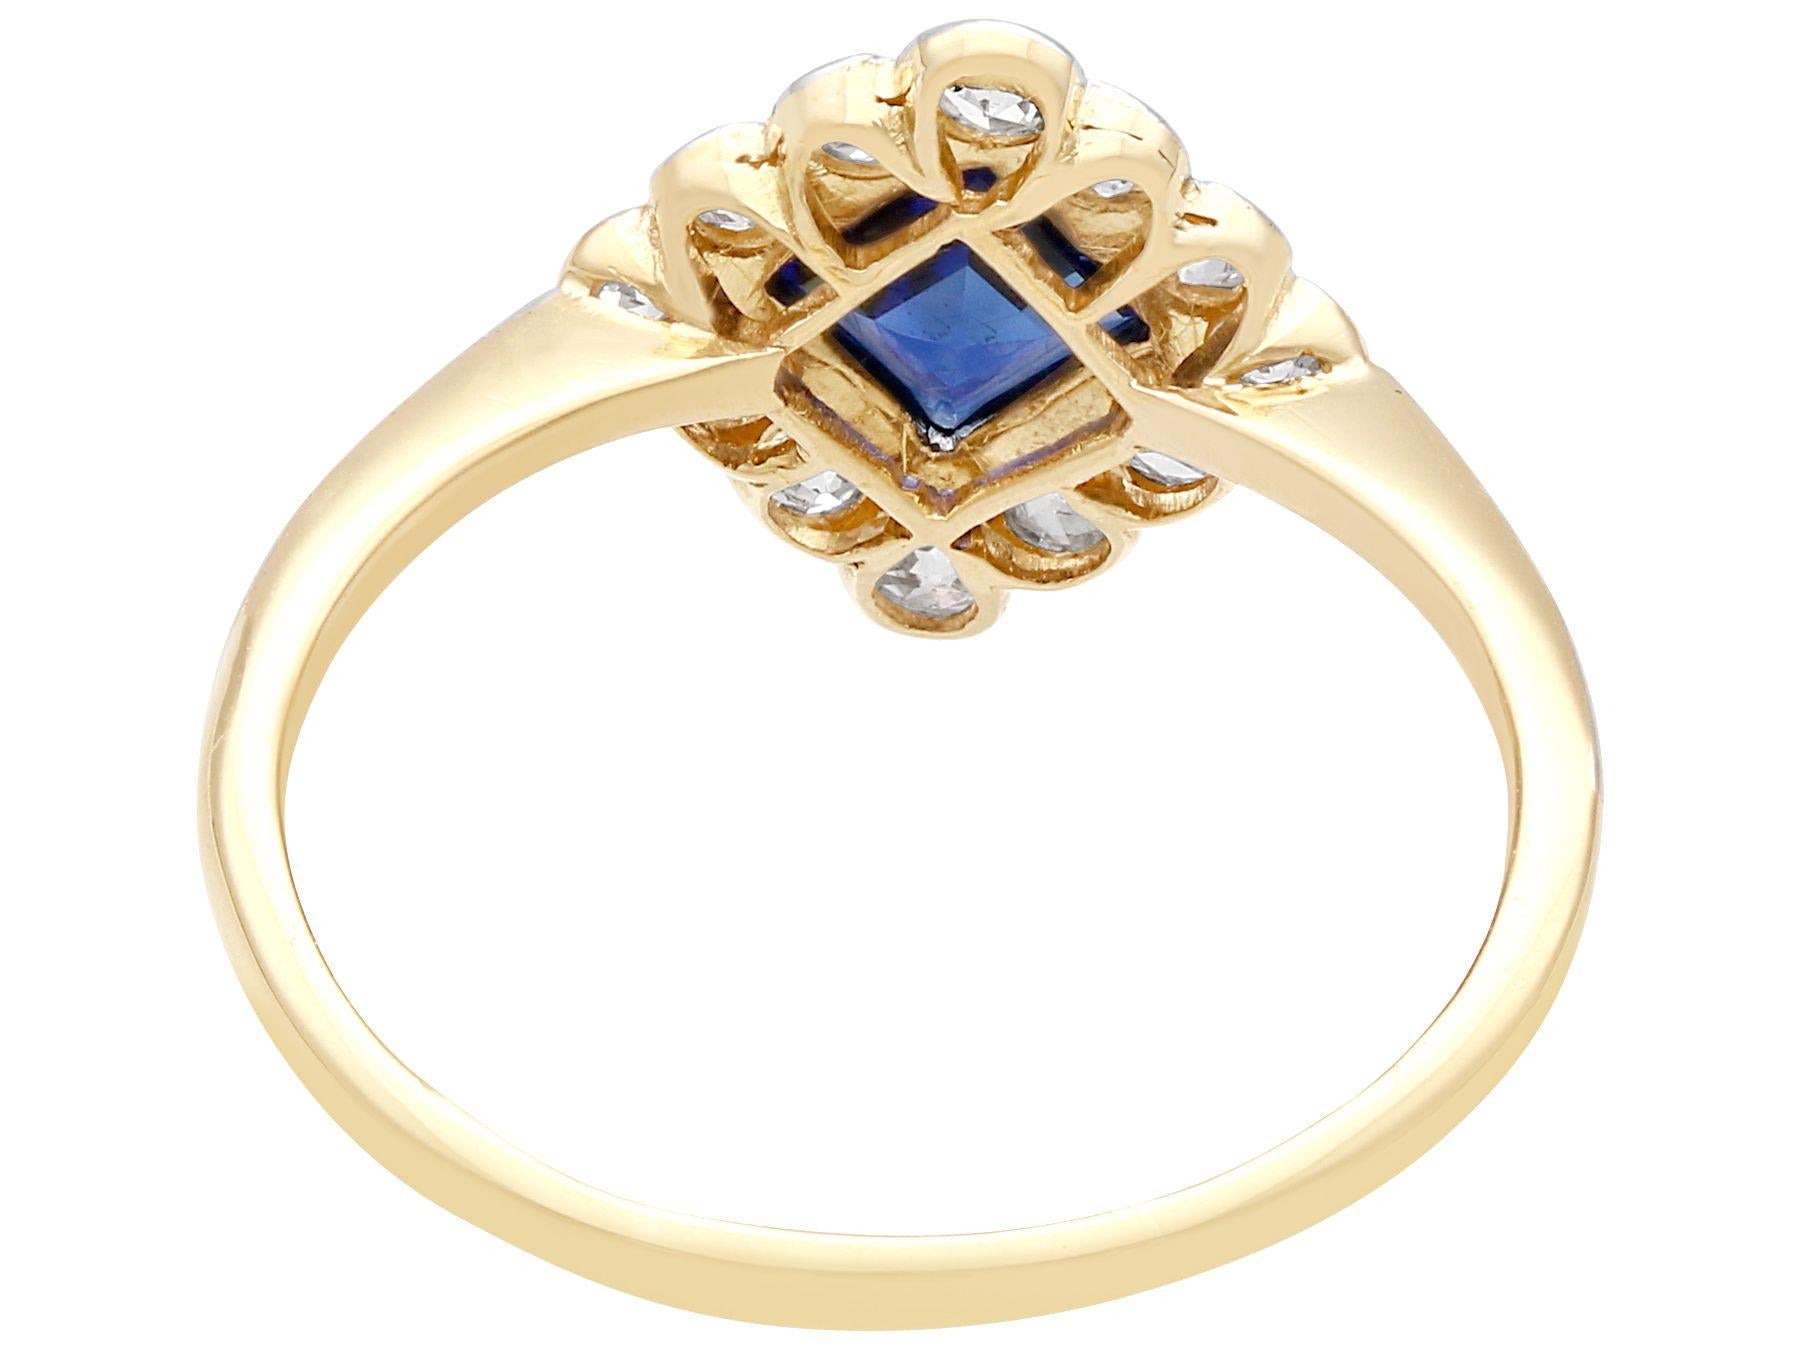 1920s Sapphire and Diamond Yellow Gold Cocktail Engagement Ring In Excellent Condition For Sale In Jesmond, Newcastle Upon Tyne